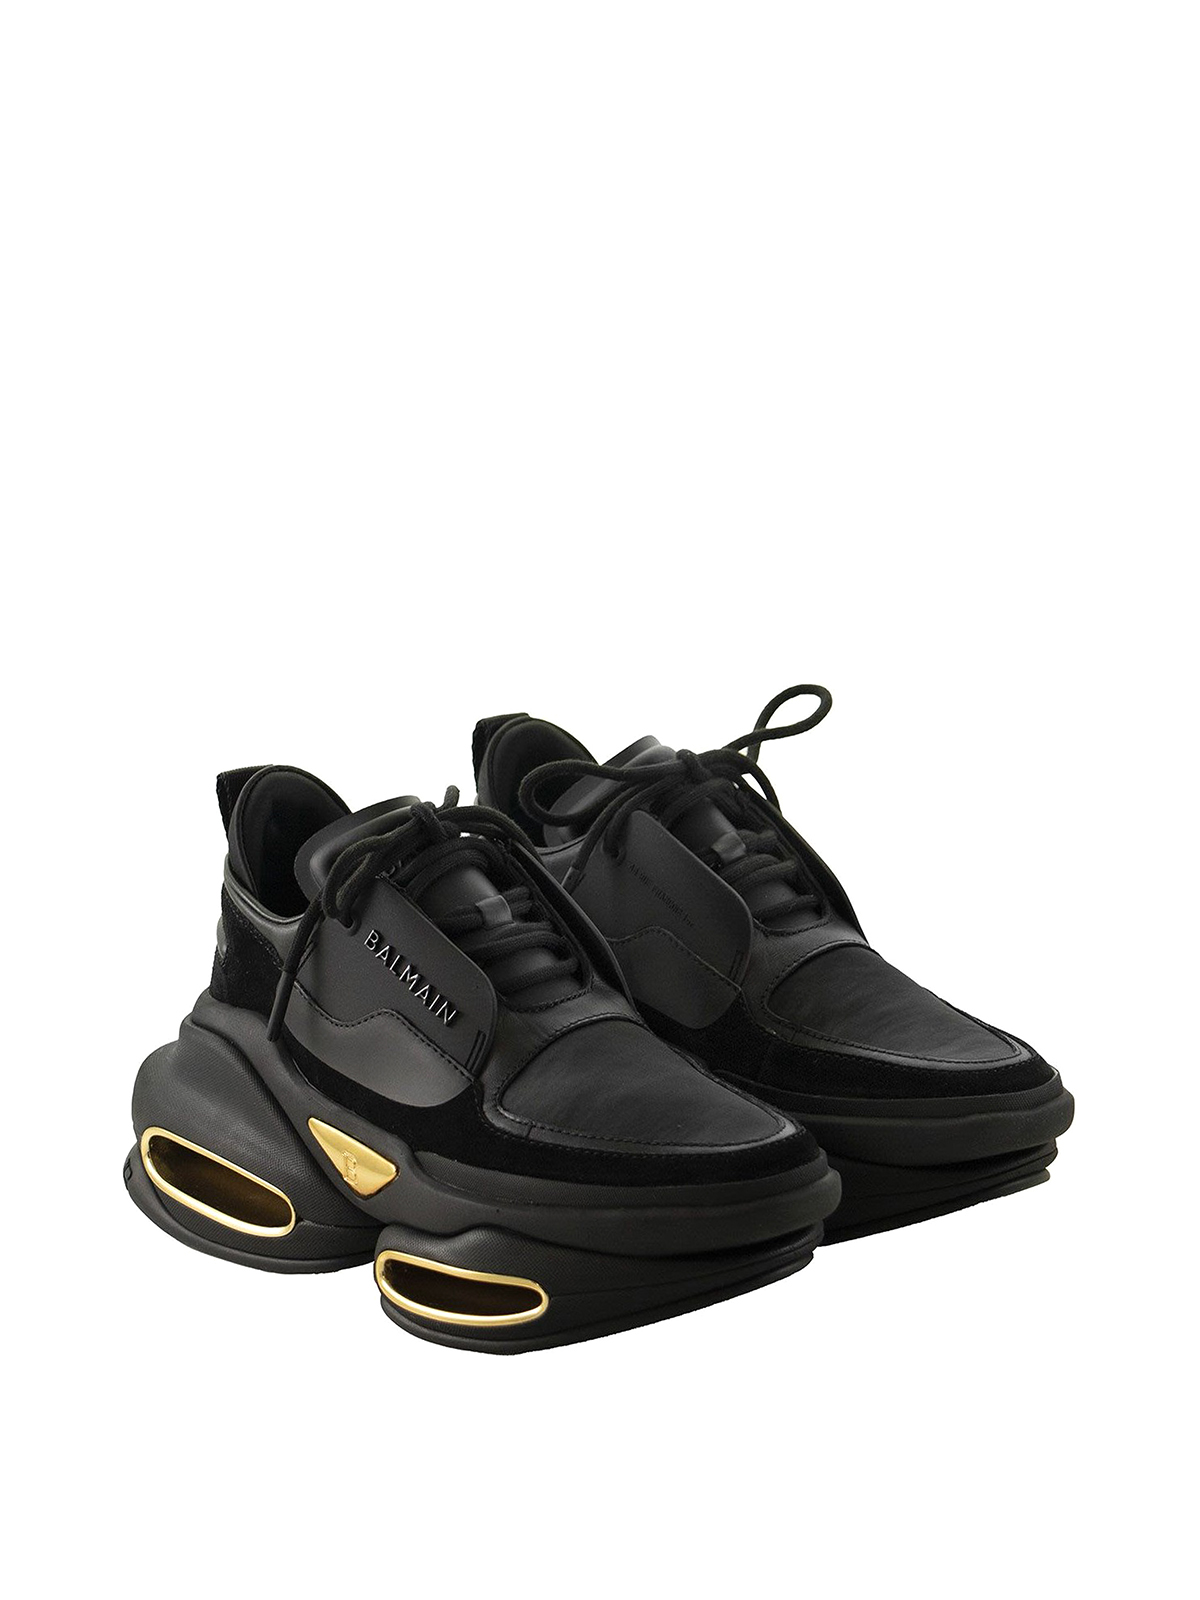 Trainers Balmain - Bbold sneakers - VN1C496LSLD0PA | Shop online at iKRIX